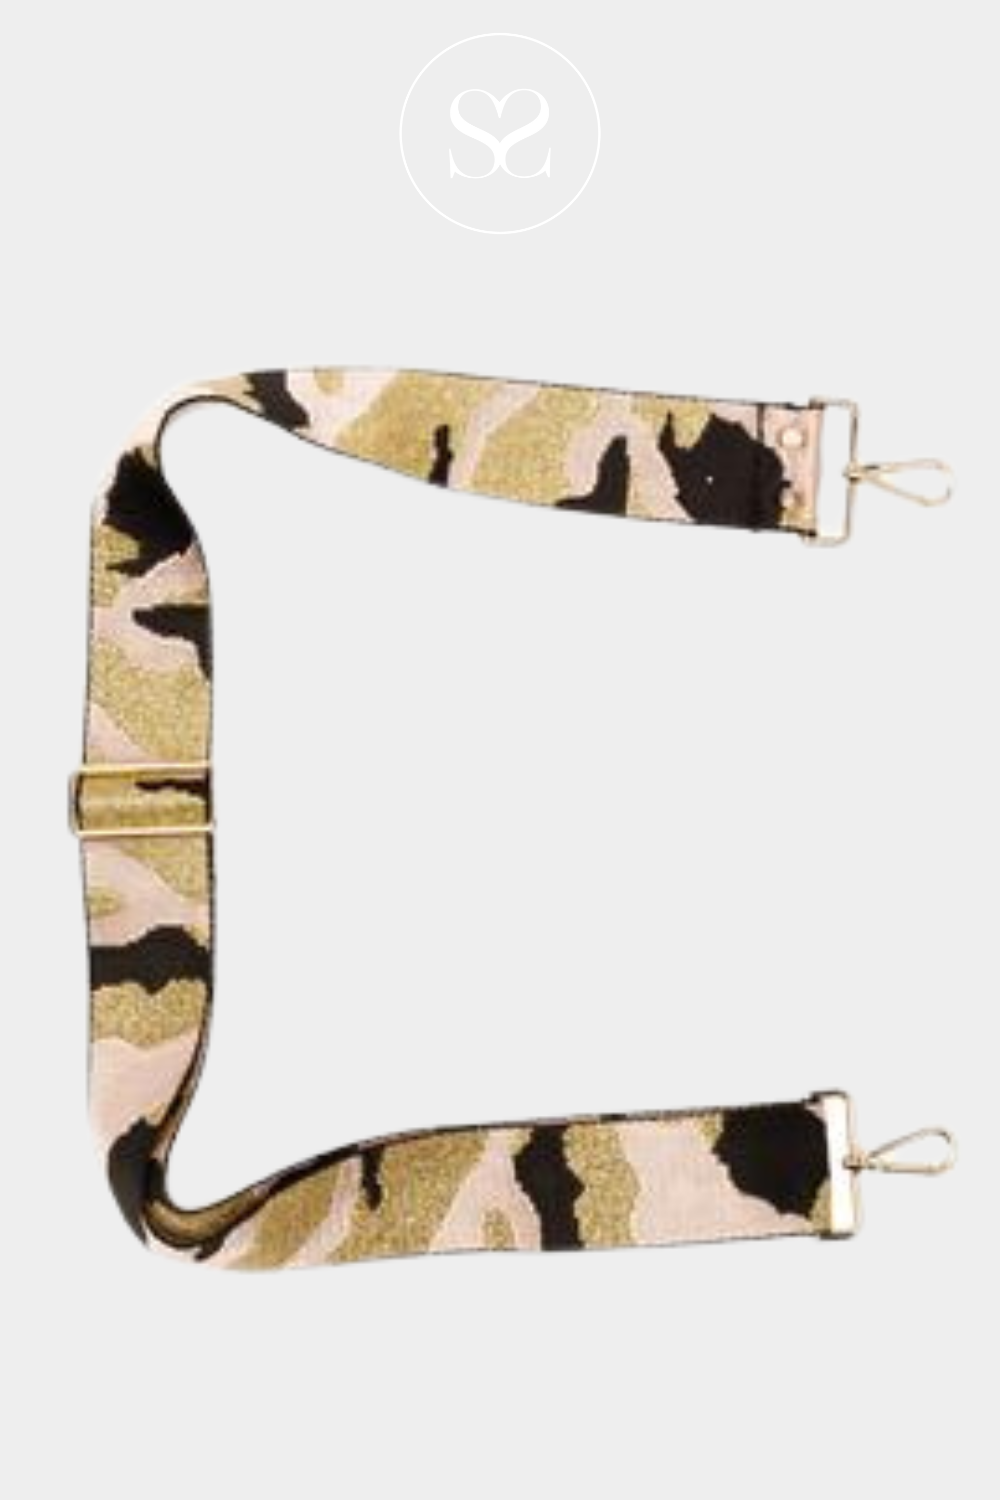 ELIE BEAUMONT - CROSSBODY STRAP - PINK CAMOUFLAGE